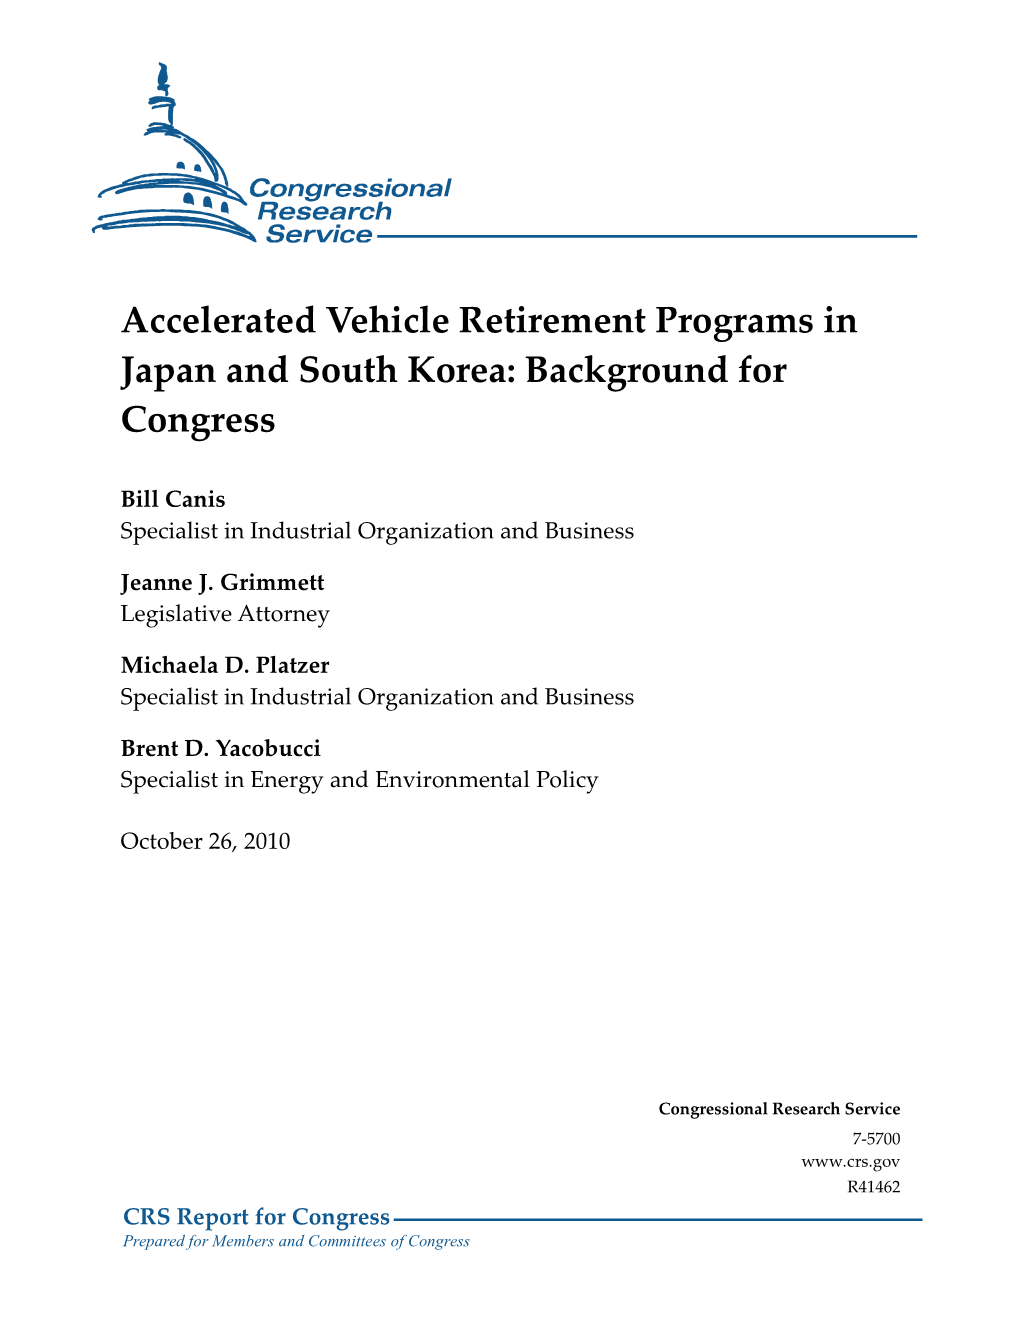 Accelerated Vehicle Retirement Programs in Japan and South Korea: Background for Congress